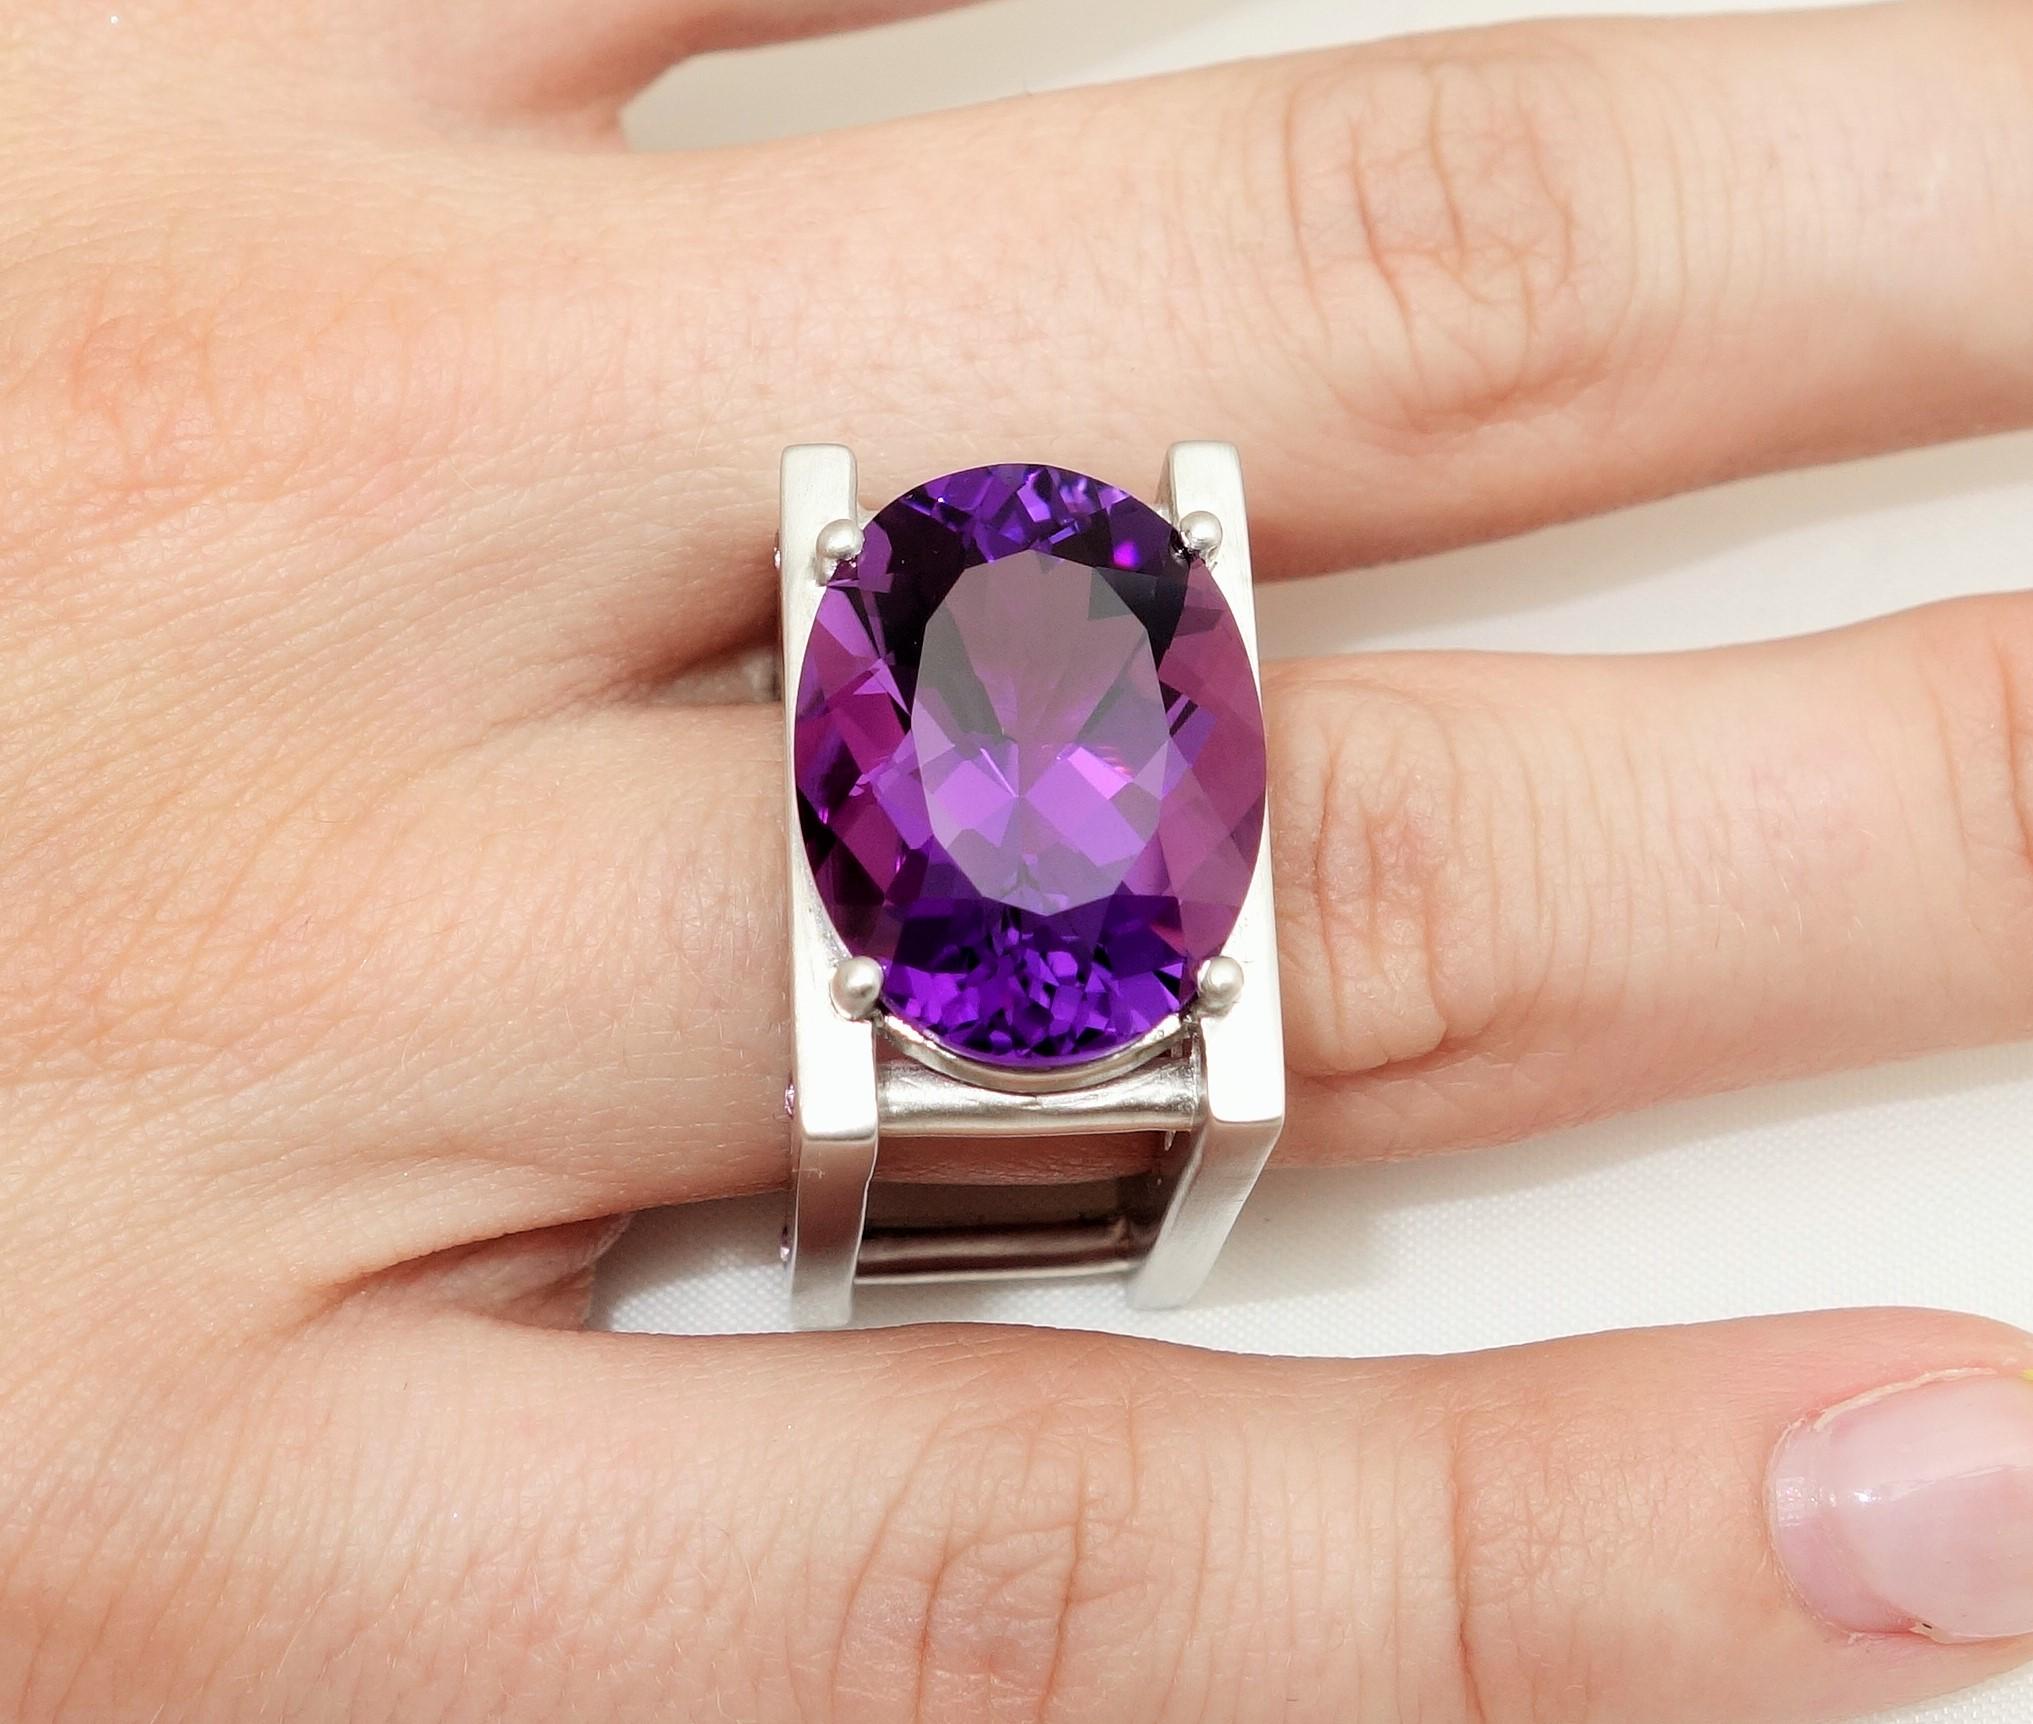 Sensational Avant-Garde Ring set with a large 18.22 Carat oval facet-cut Amethyst and 8 'rivets' set with small pink sapphires, in a unique Industrial style Sterling Silver Rhodium Tarnish-resistant mounting. More fabulous in person and so